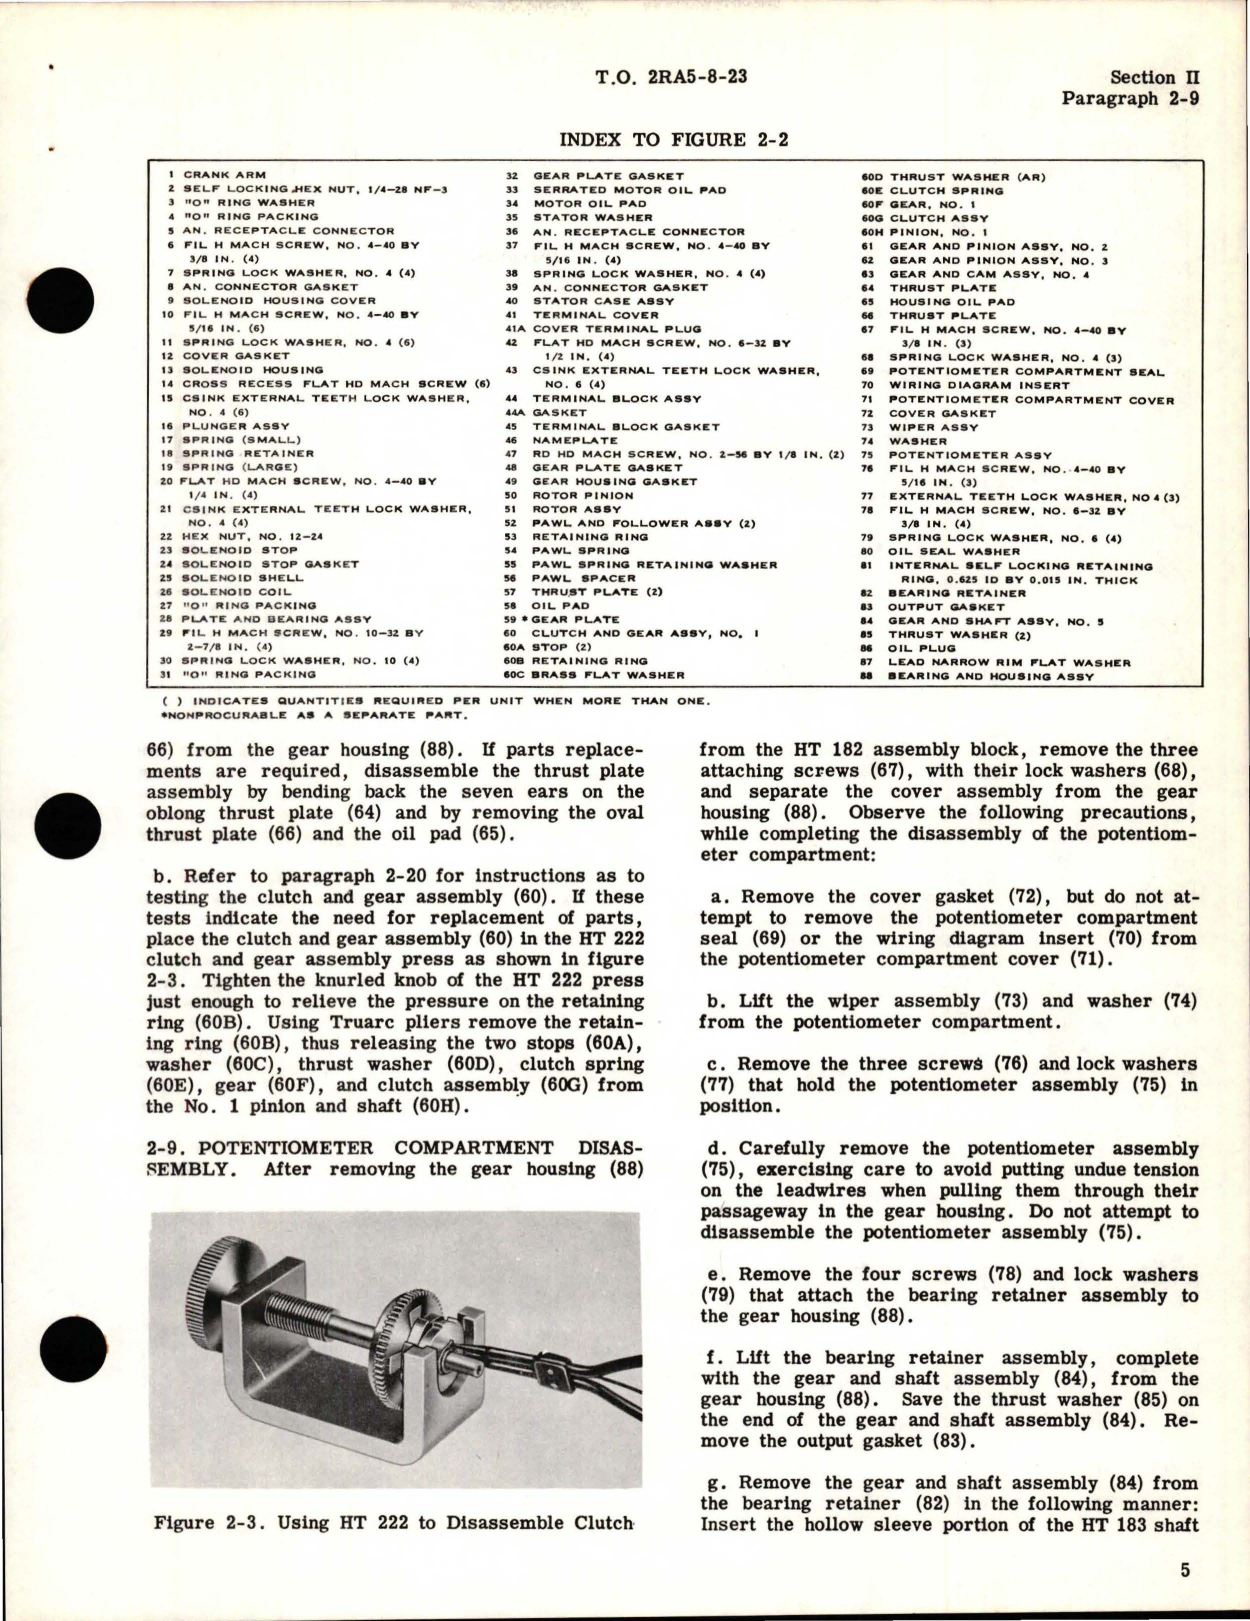 Sample page 9 from AirCorps Library document: Overhaul Instructions for Waste Gate Motors - MG7012A-1 and MG7012C-1